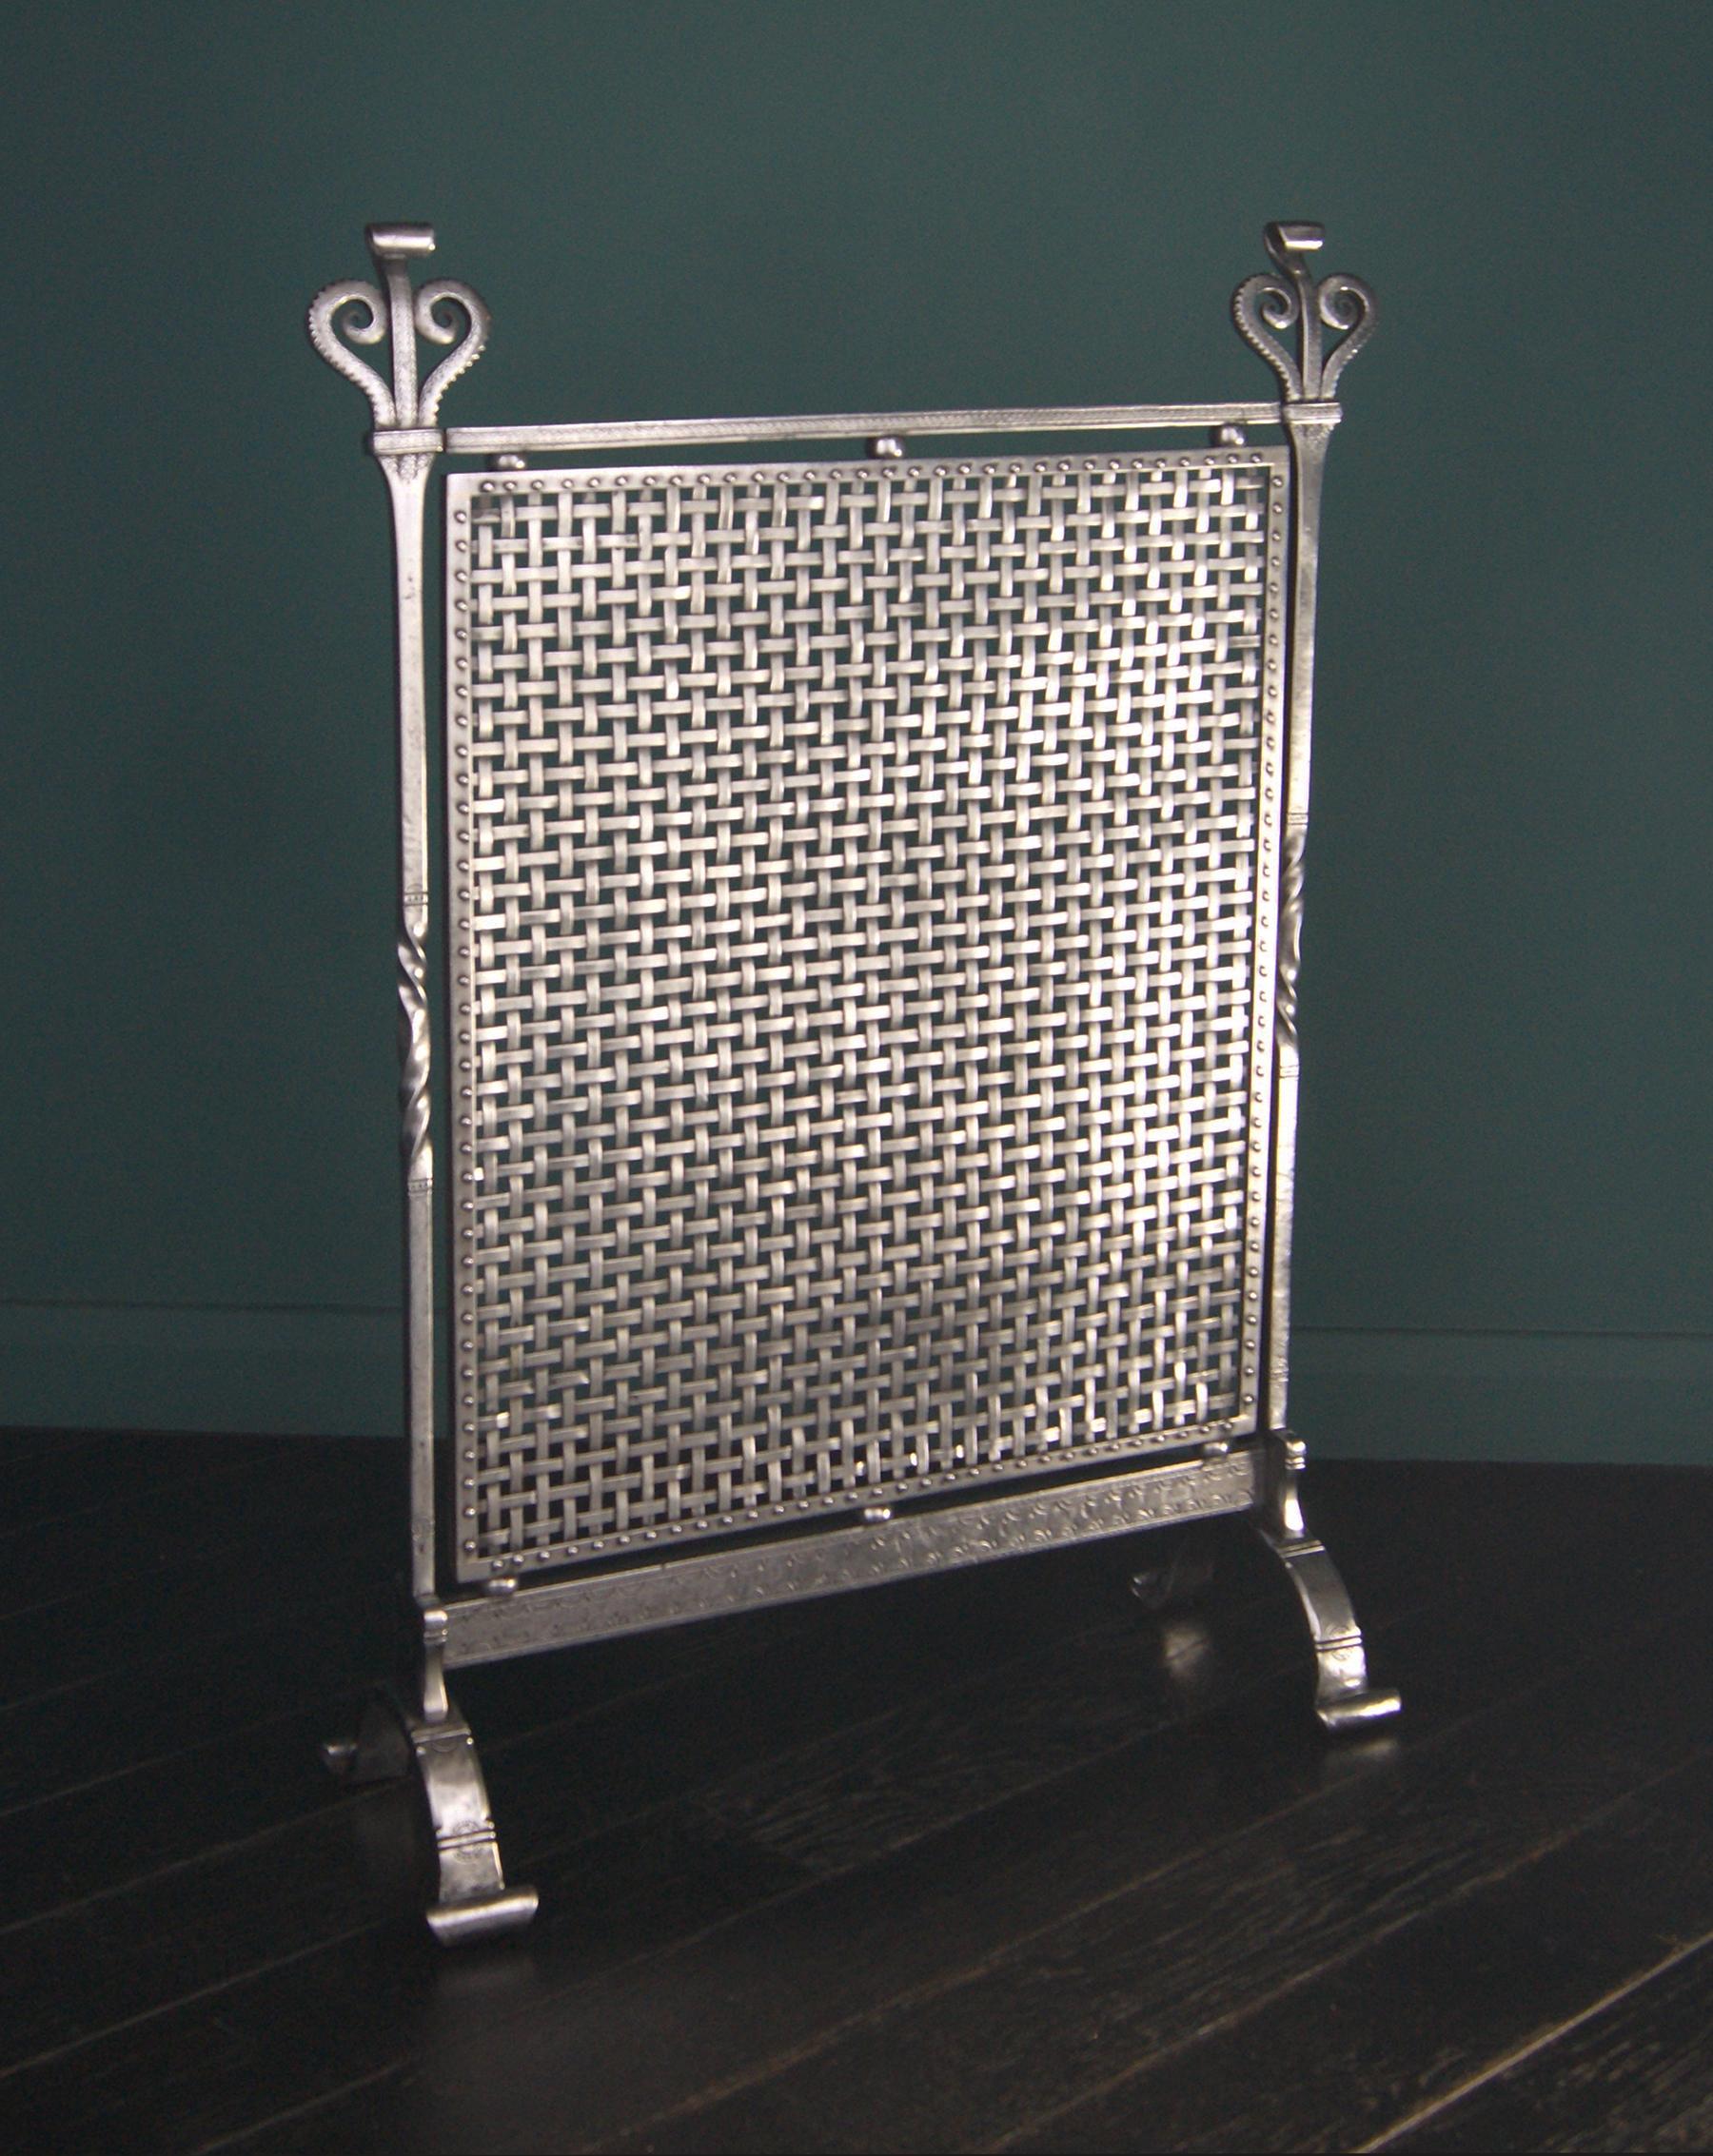 A finely engraved early 20th century polished wrought fire screen by C Downer, Campden, Glos.  The fire screen with densely latticed mesh riveted to inner frame, extensive intricate engraving to surrounding structure and beautifully scrolled finials